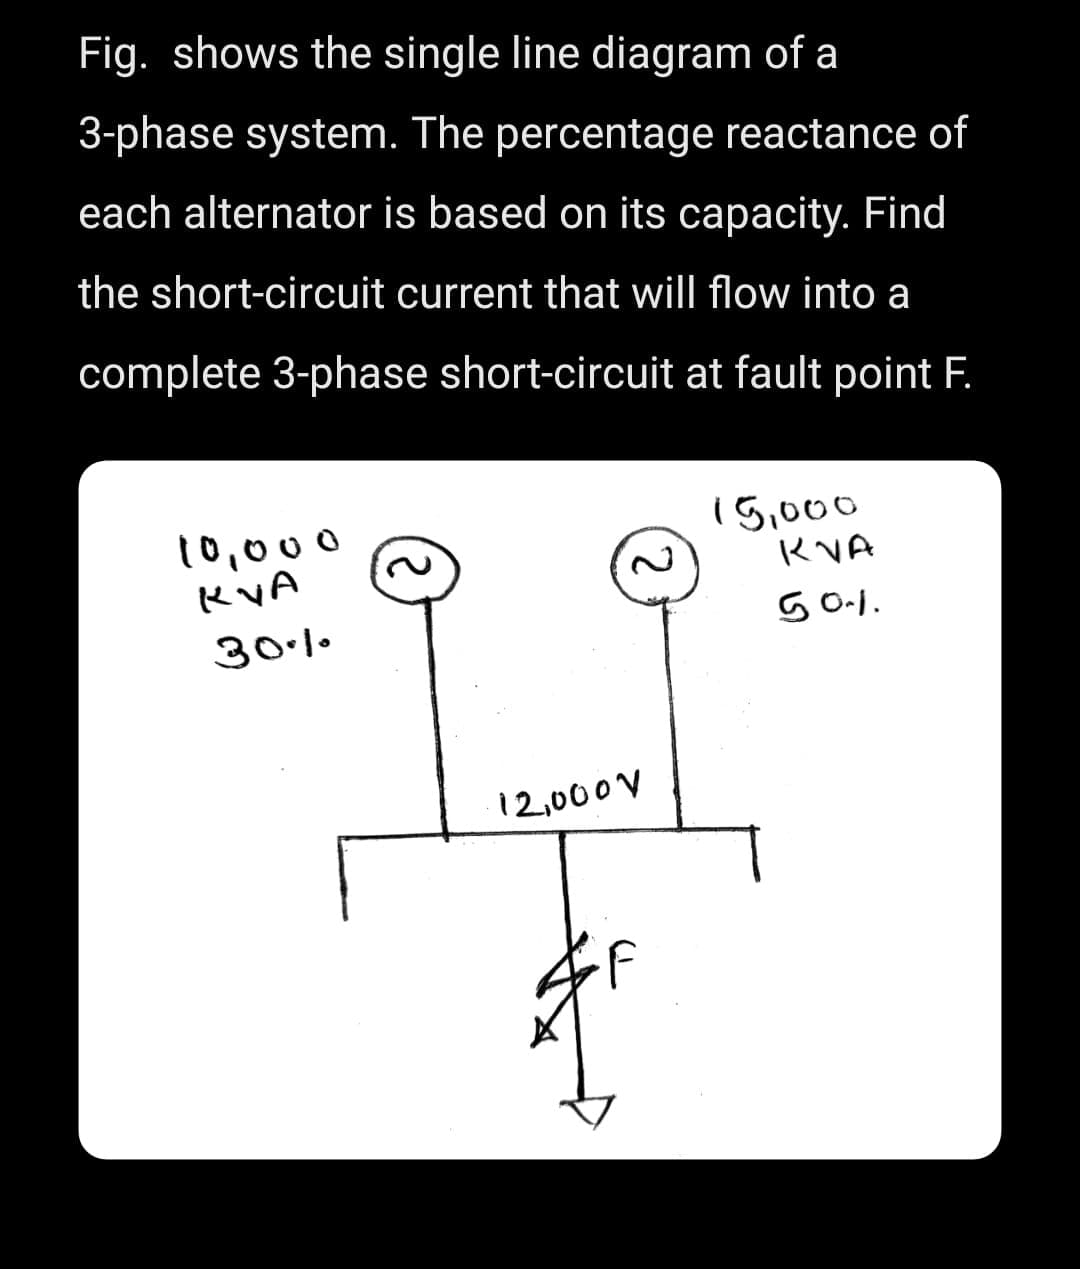 Fig. shows the single line diagram of a
3-phase system. The percentage reactance of
each alternator is based on its capacity. Find
the short-circuit current that will flow into a
complete 3-phase short-circuit at fault point F.
10,000
KVA
30.1.
12,000
15,000
KVA
50.1.